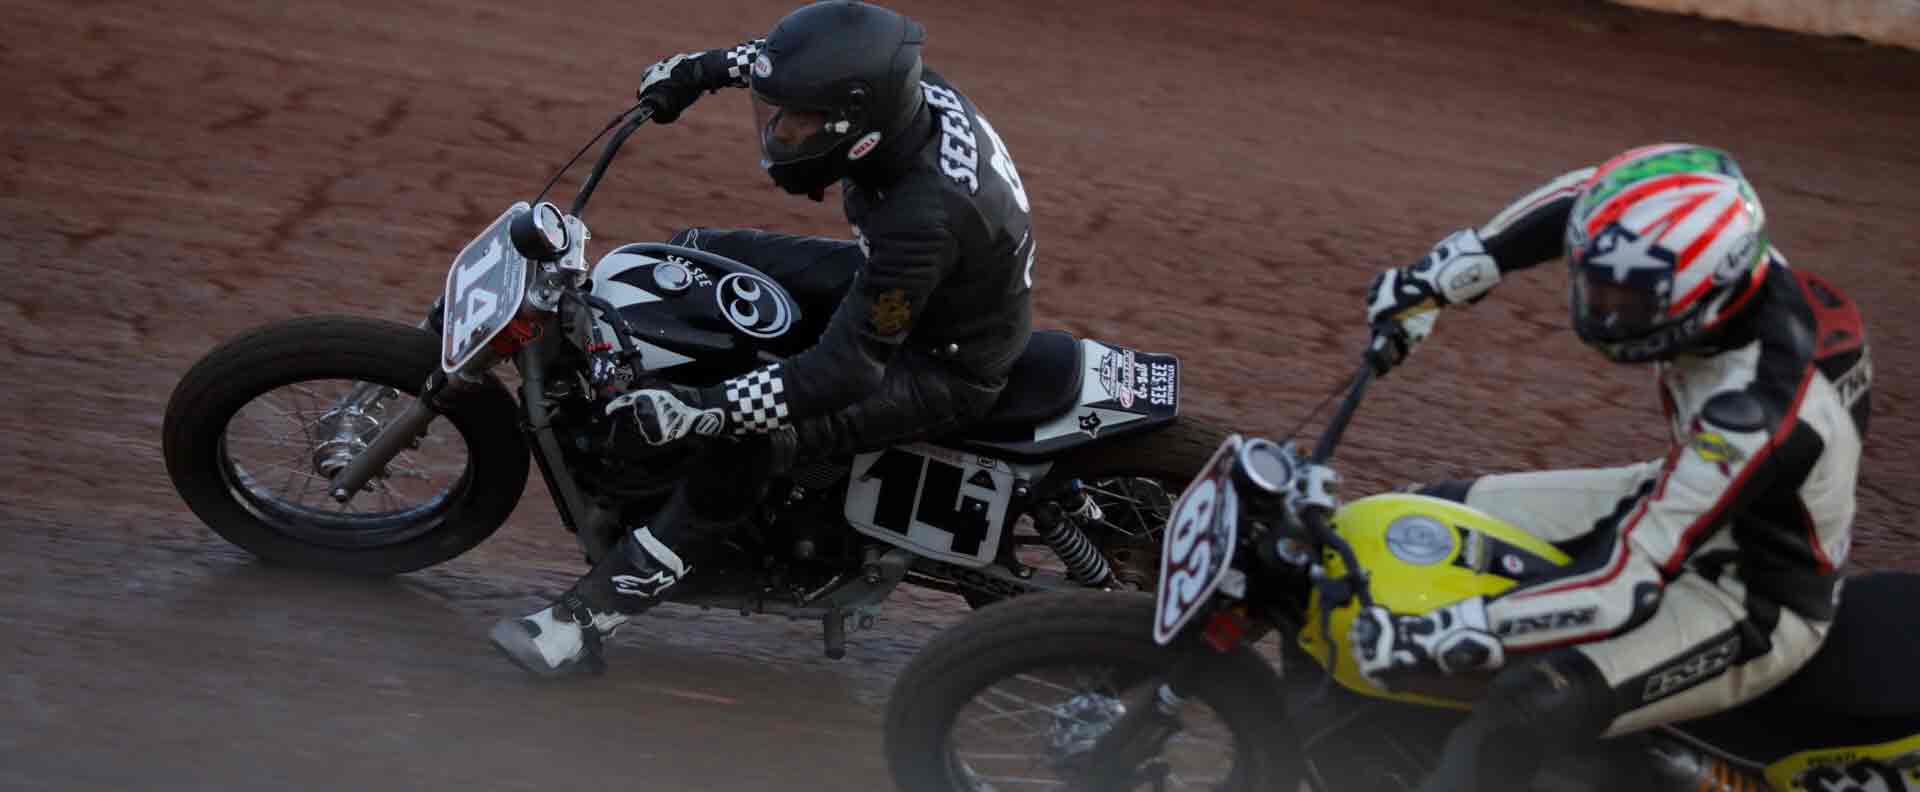 Andy DiBrino racing at Dixie Speedway in RSD Super Hooligans flat track American Flat Track AMA event